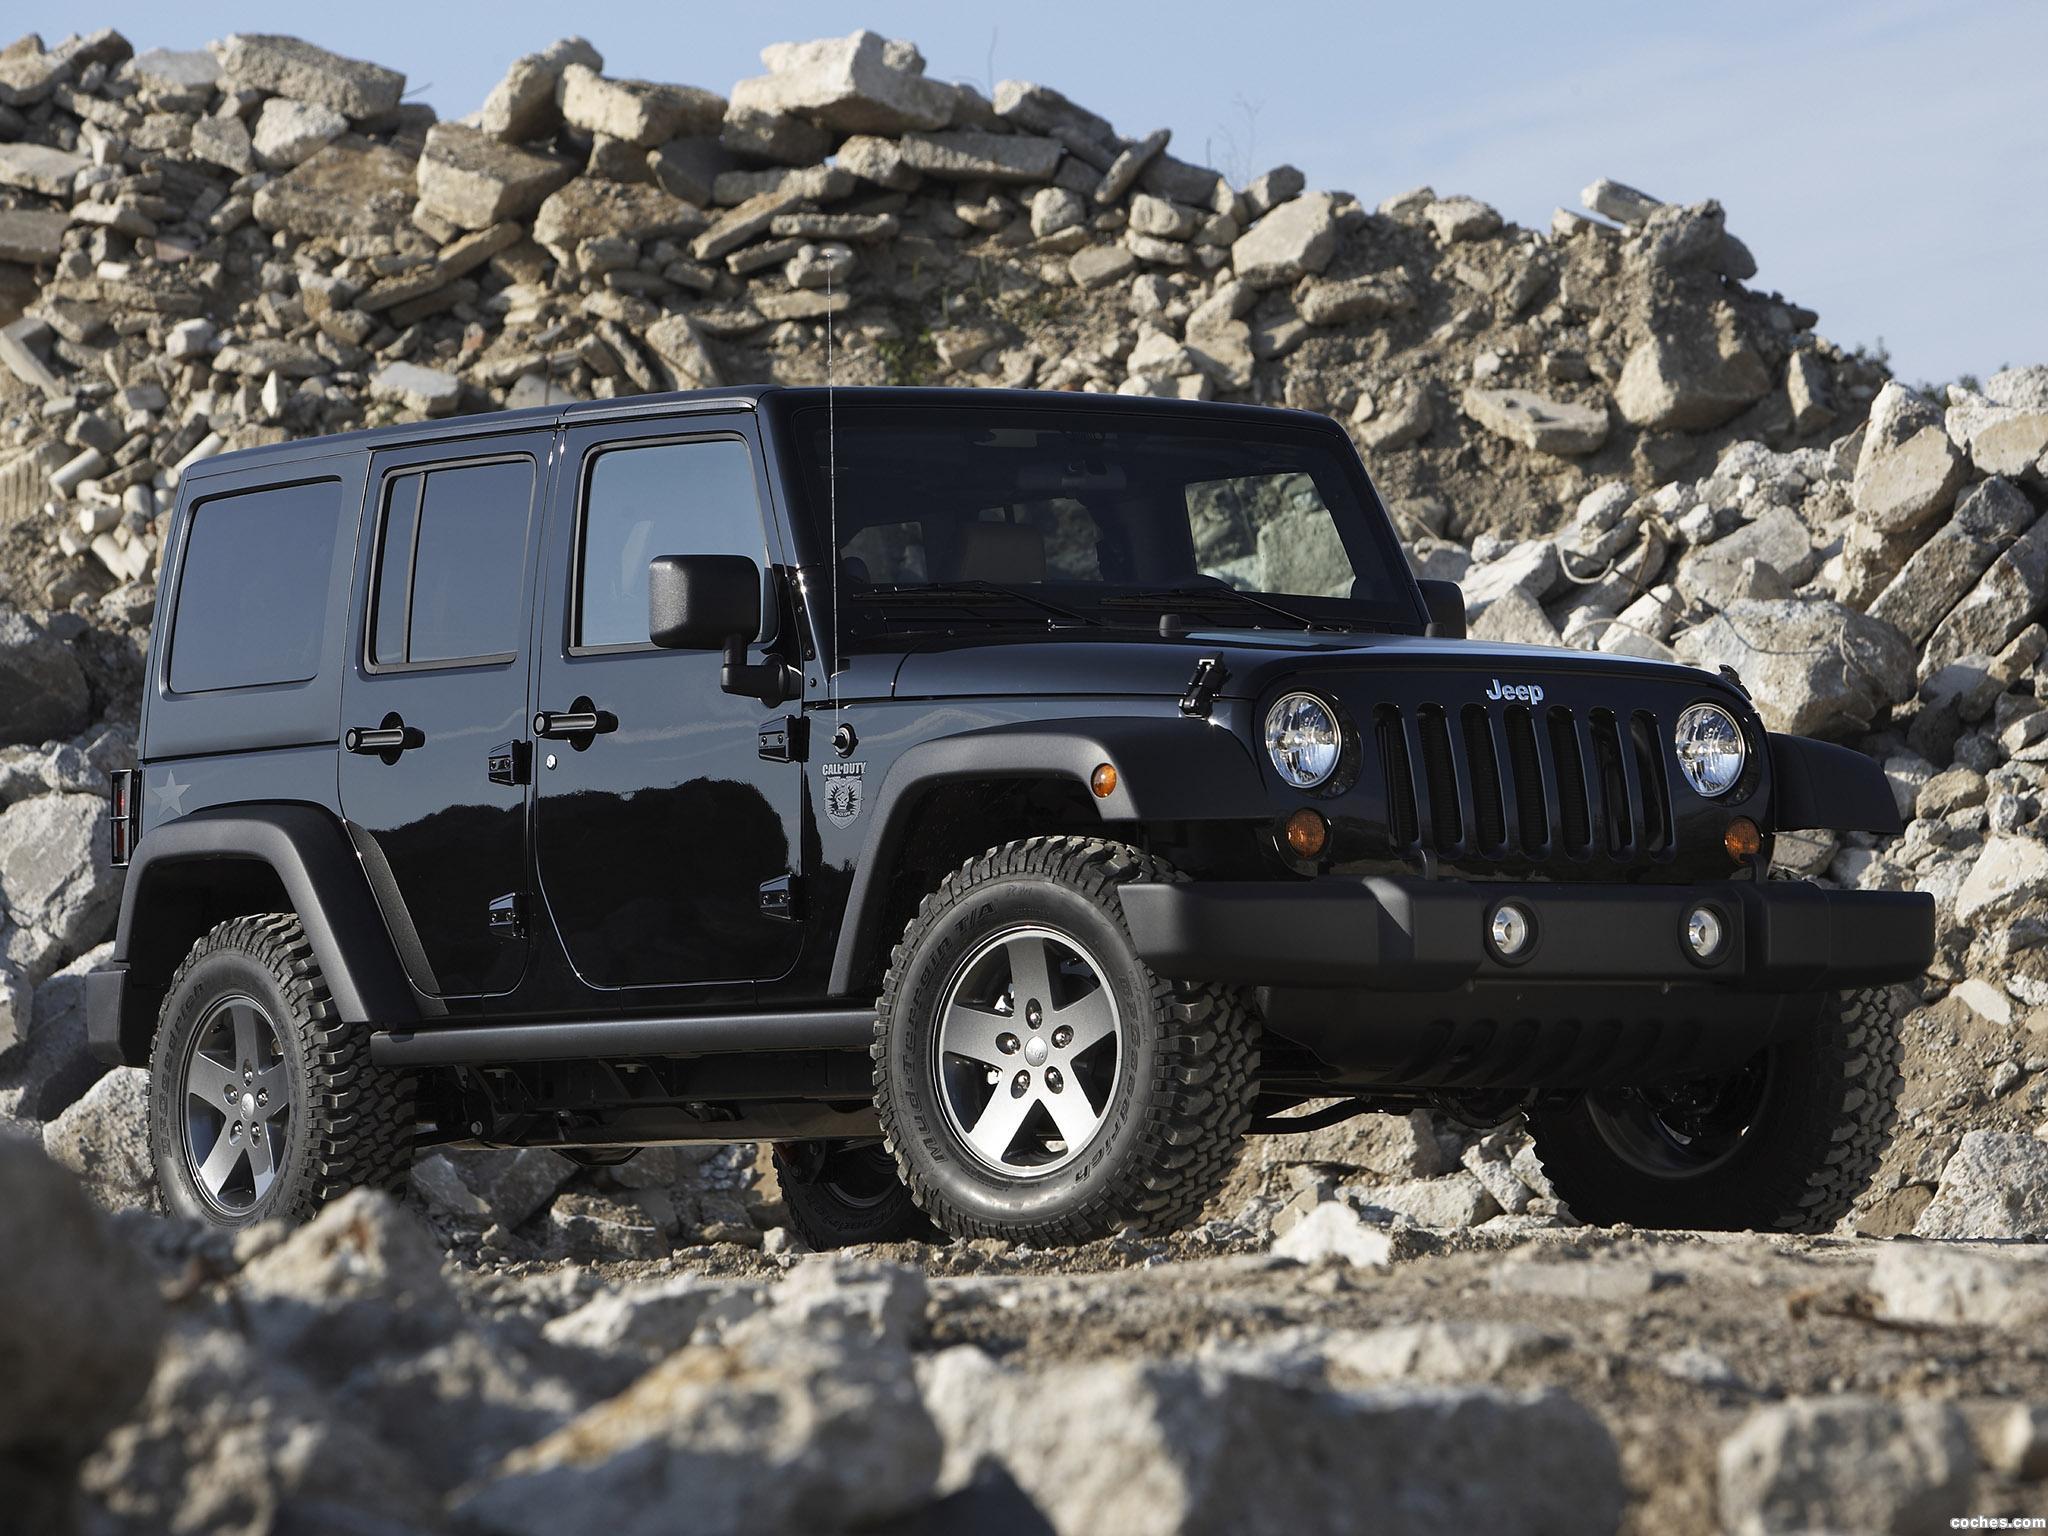 jeep_wrangler-call-of-duty-black-ops-edition-2010_r3